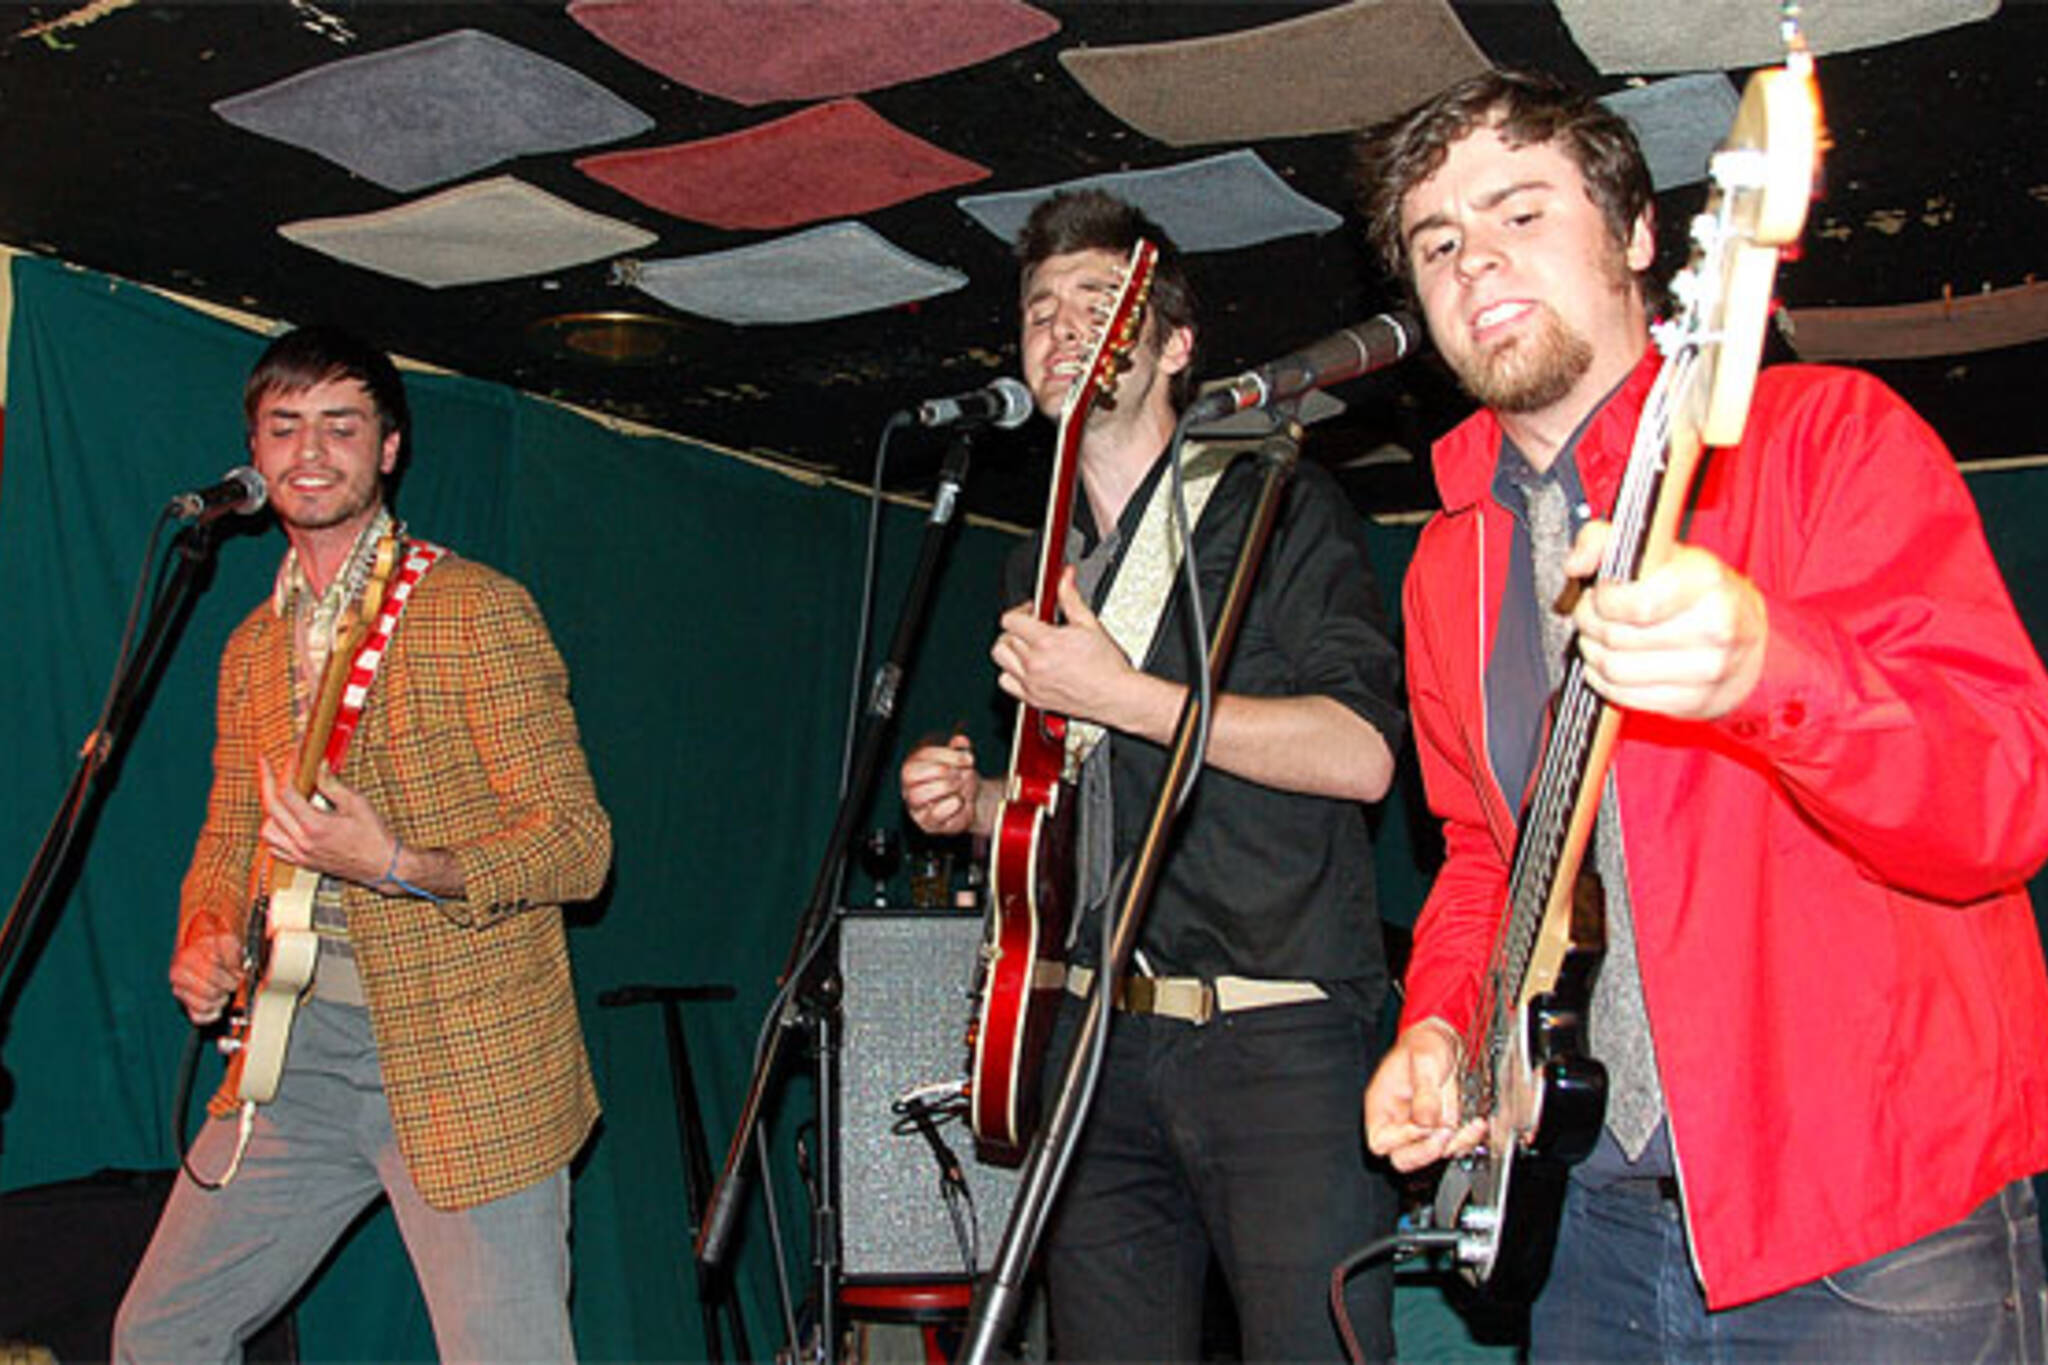 Photo of The Barons taken at TWM Showcase #1, by Kyle Rea